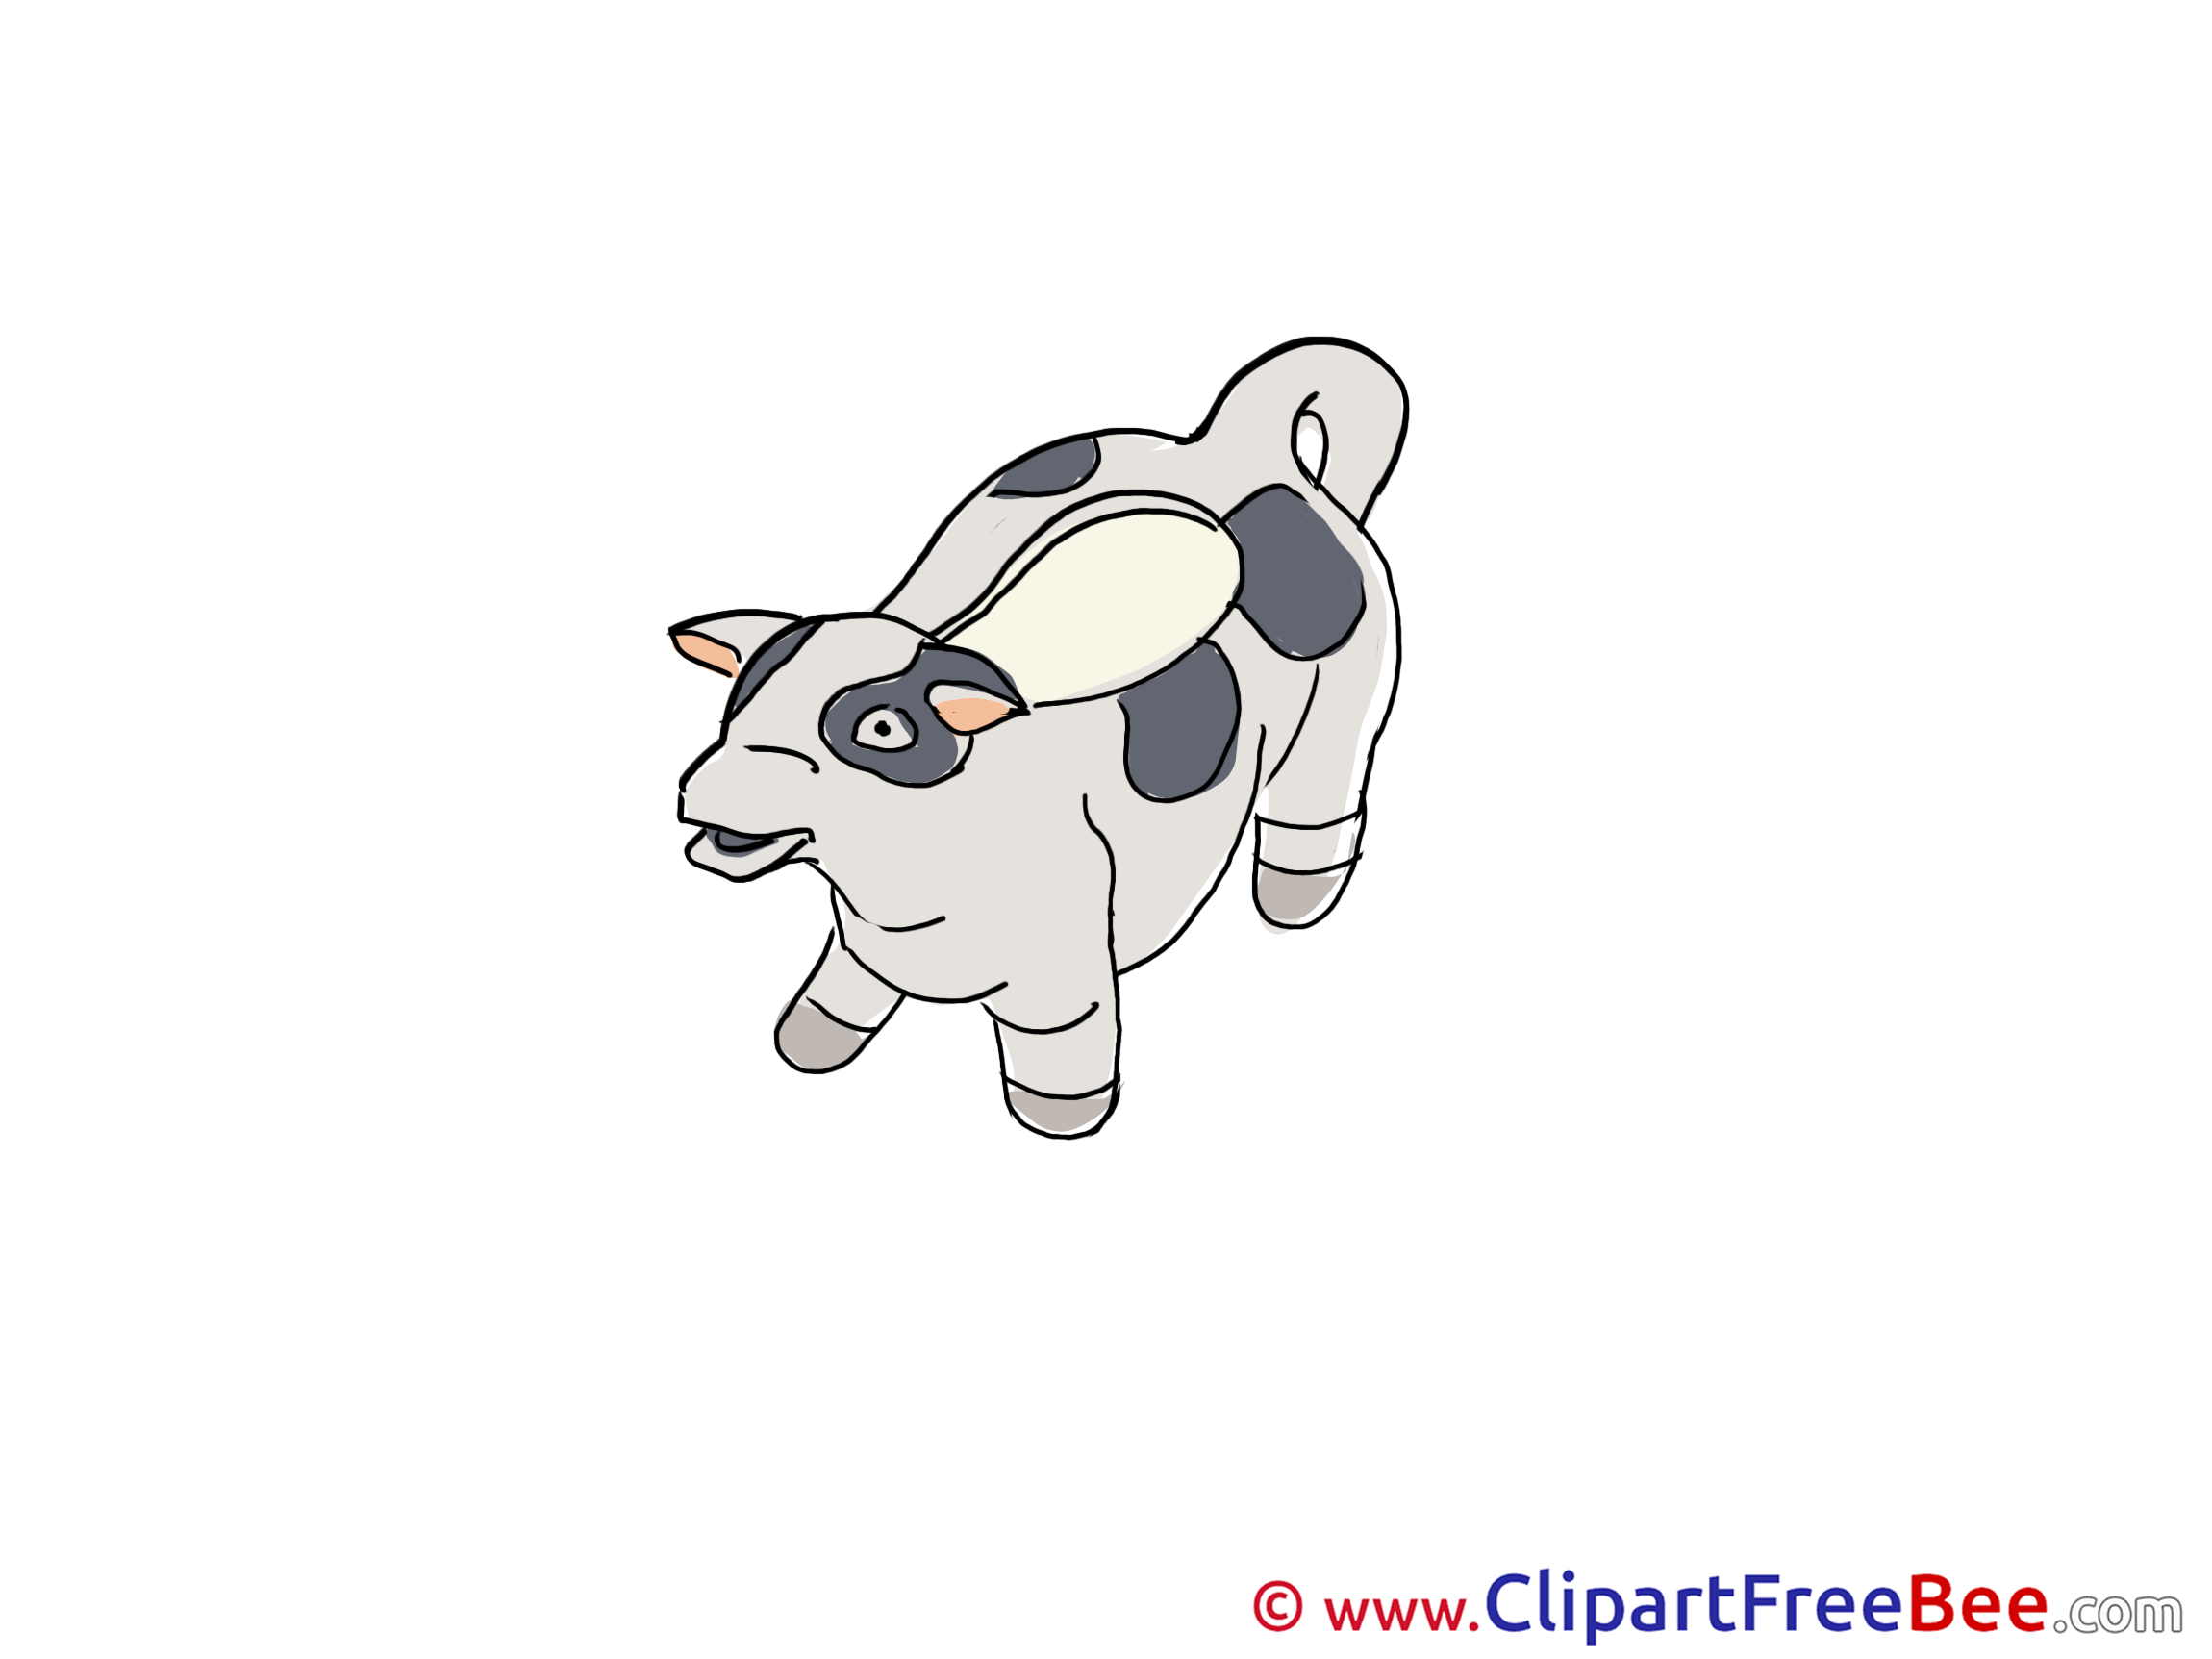 Cow printable Images for download